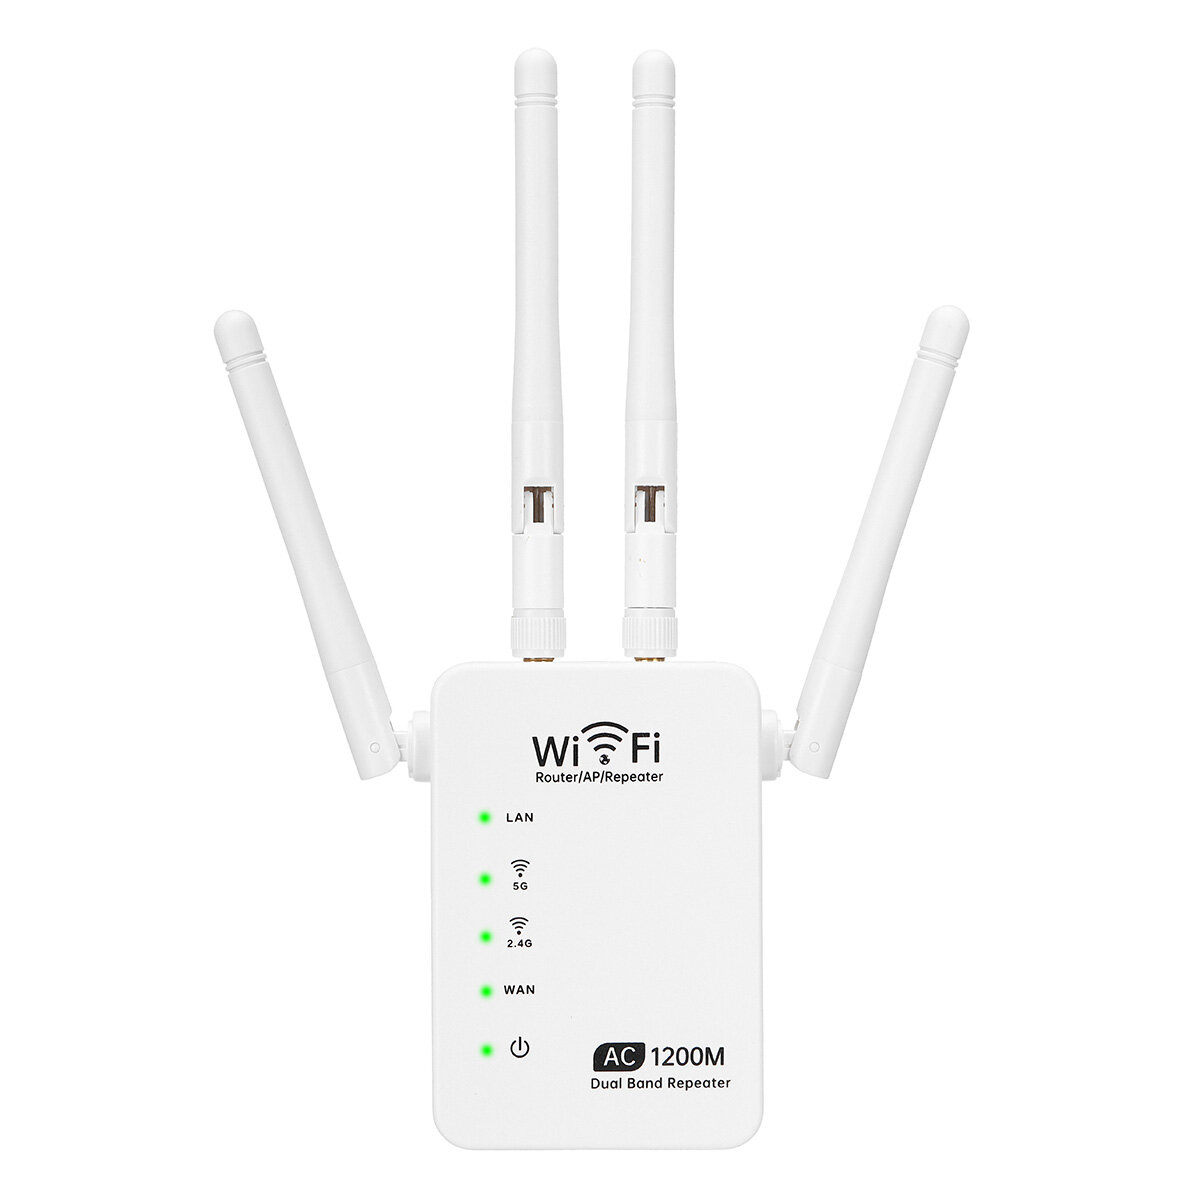 

1200Mbps Repeater Wifi Amplifier 5G/2.4ghz Gigabit Router Extender Booster Repeater WiFi Range Extender Signal Home Offi